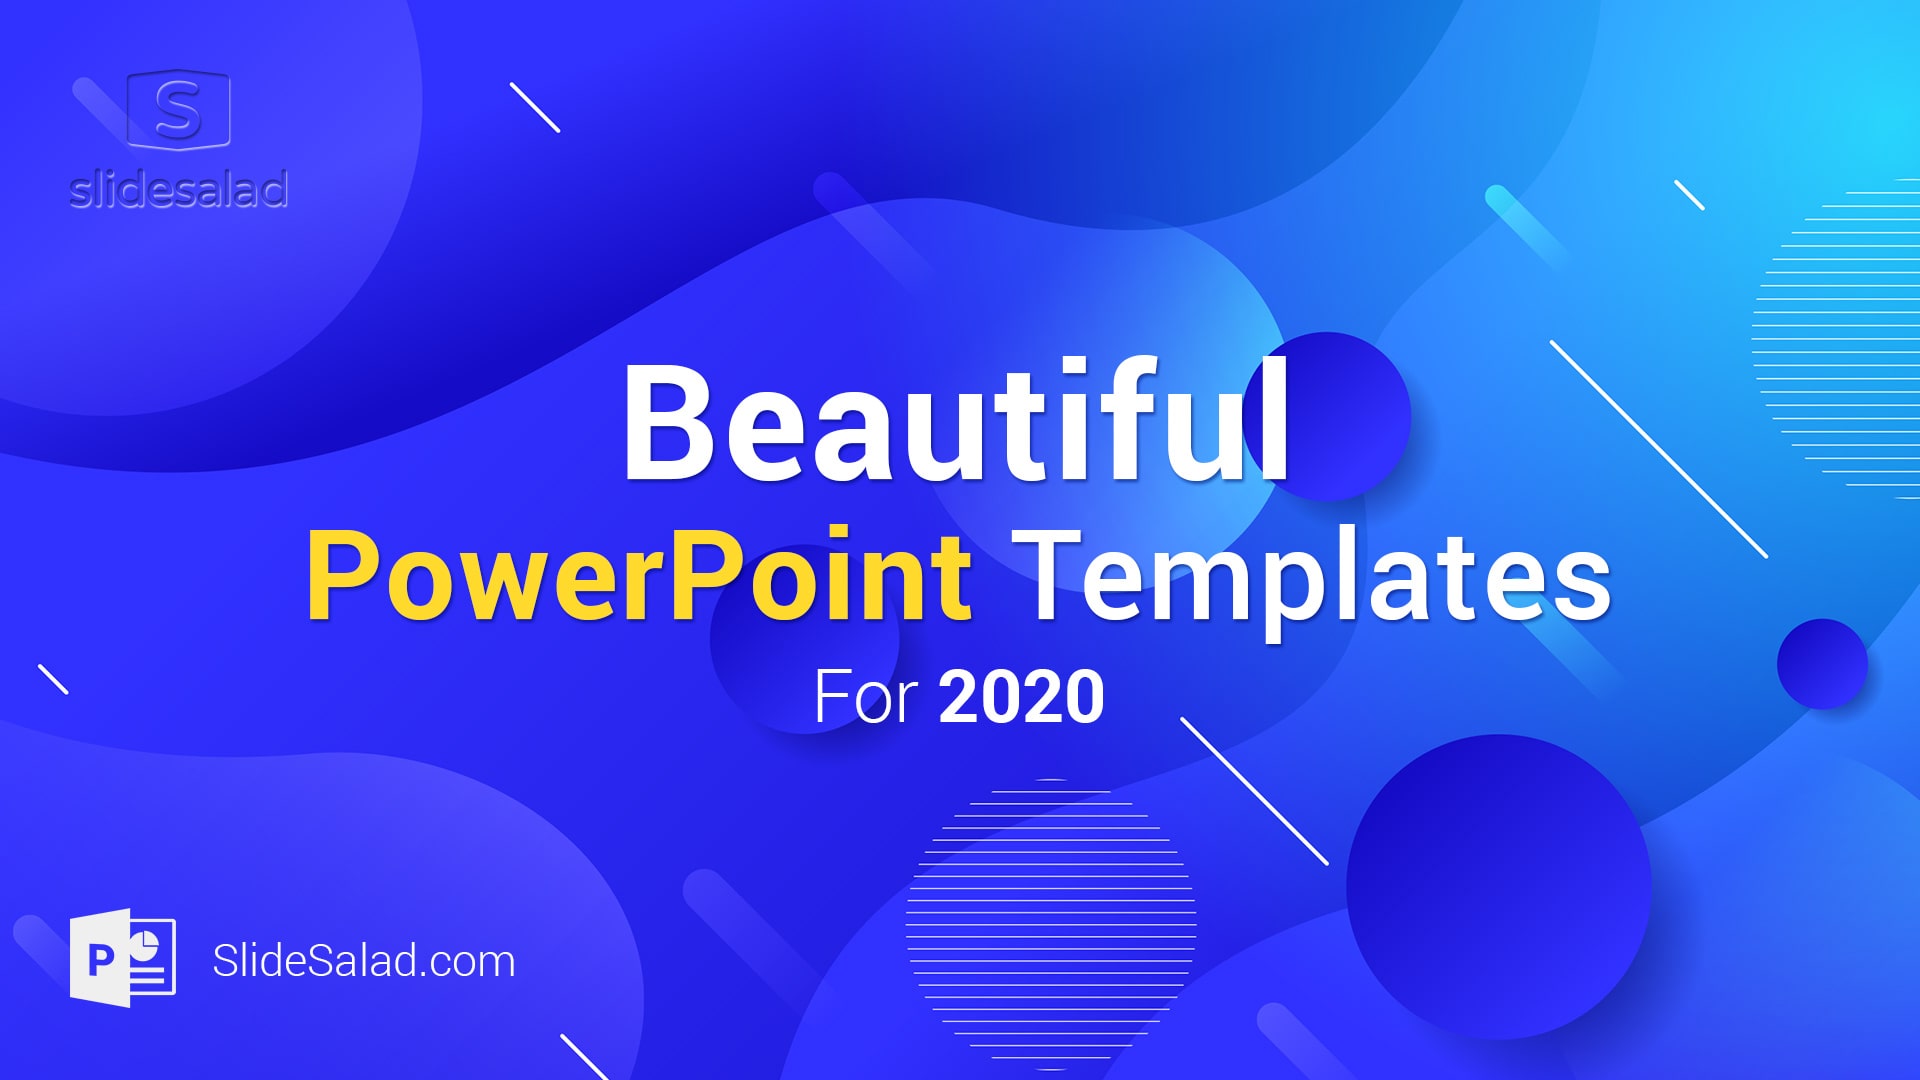 Beautiful PowerPoint (PPT) Presentation Templates for 2020